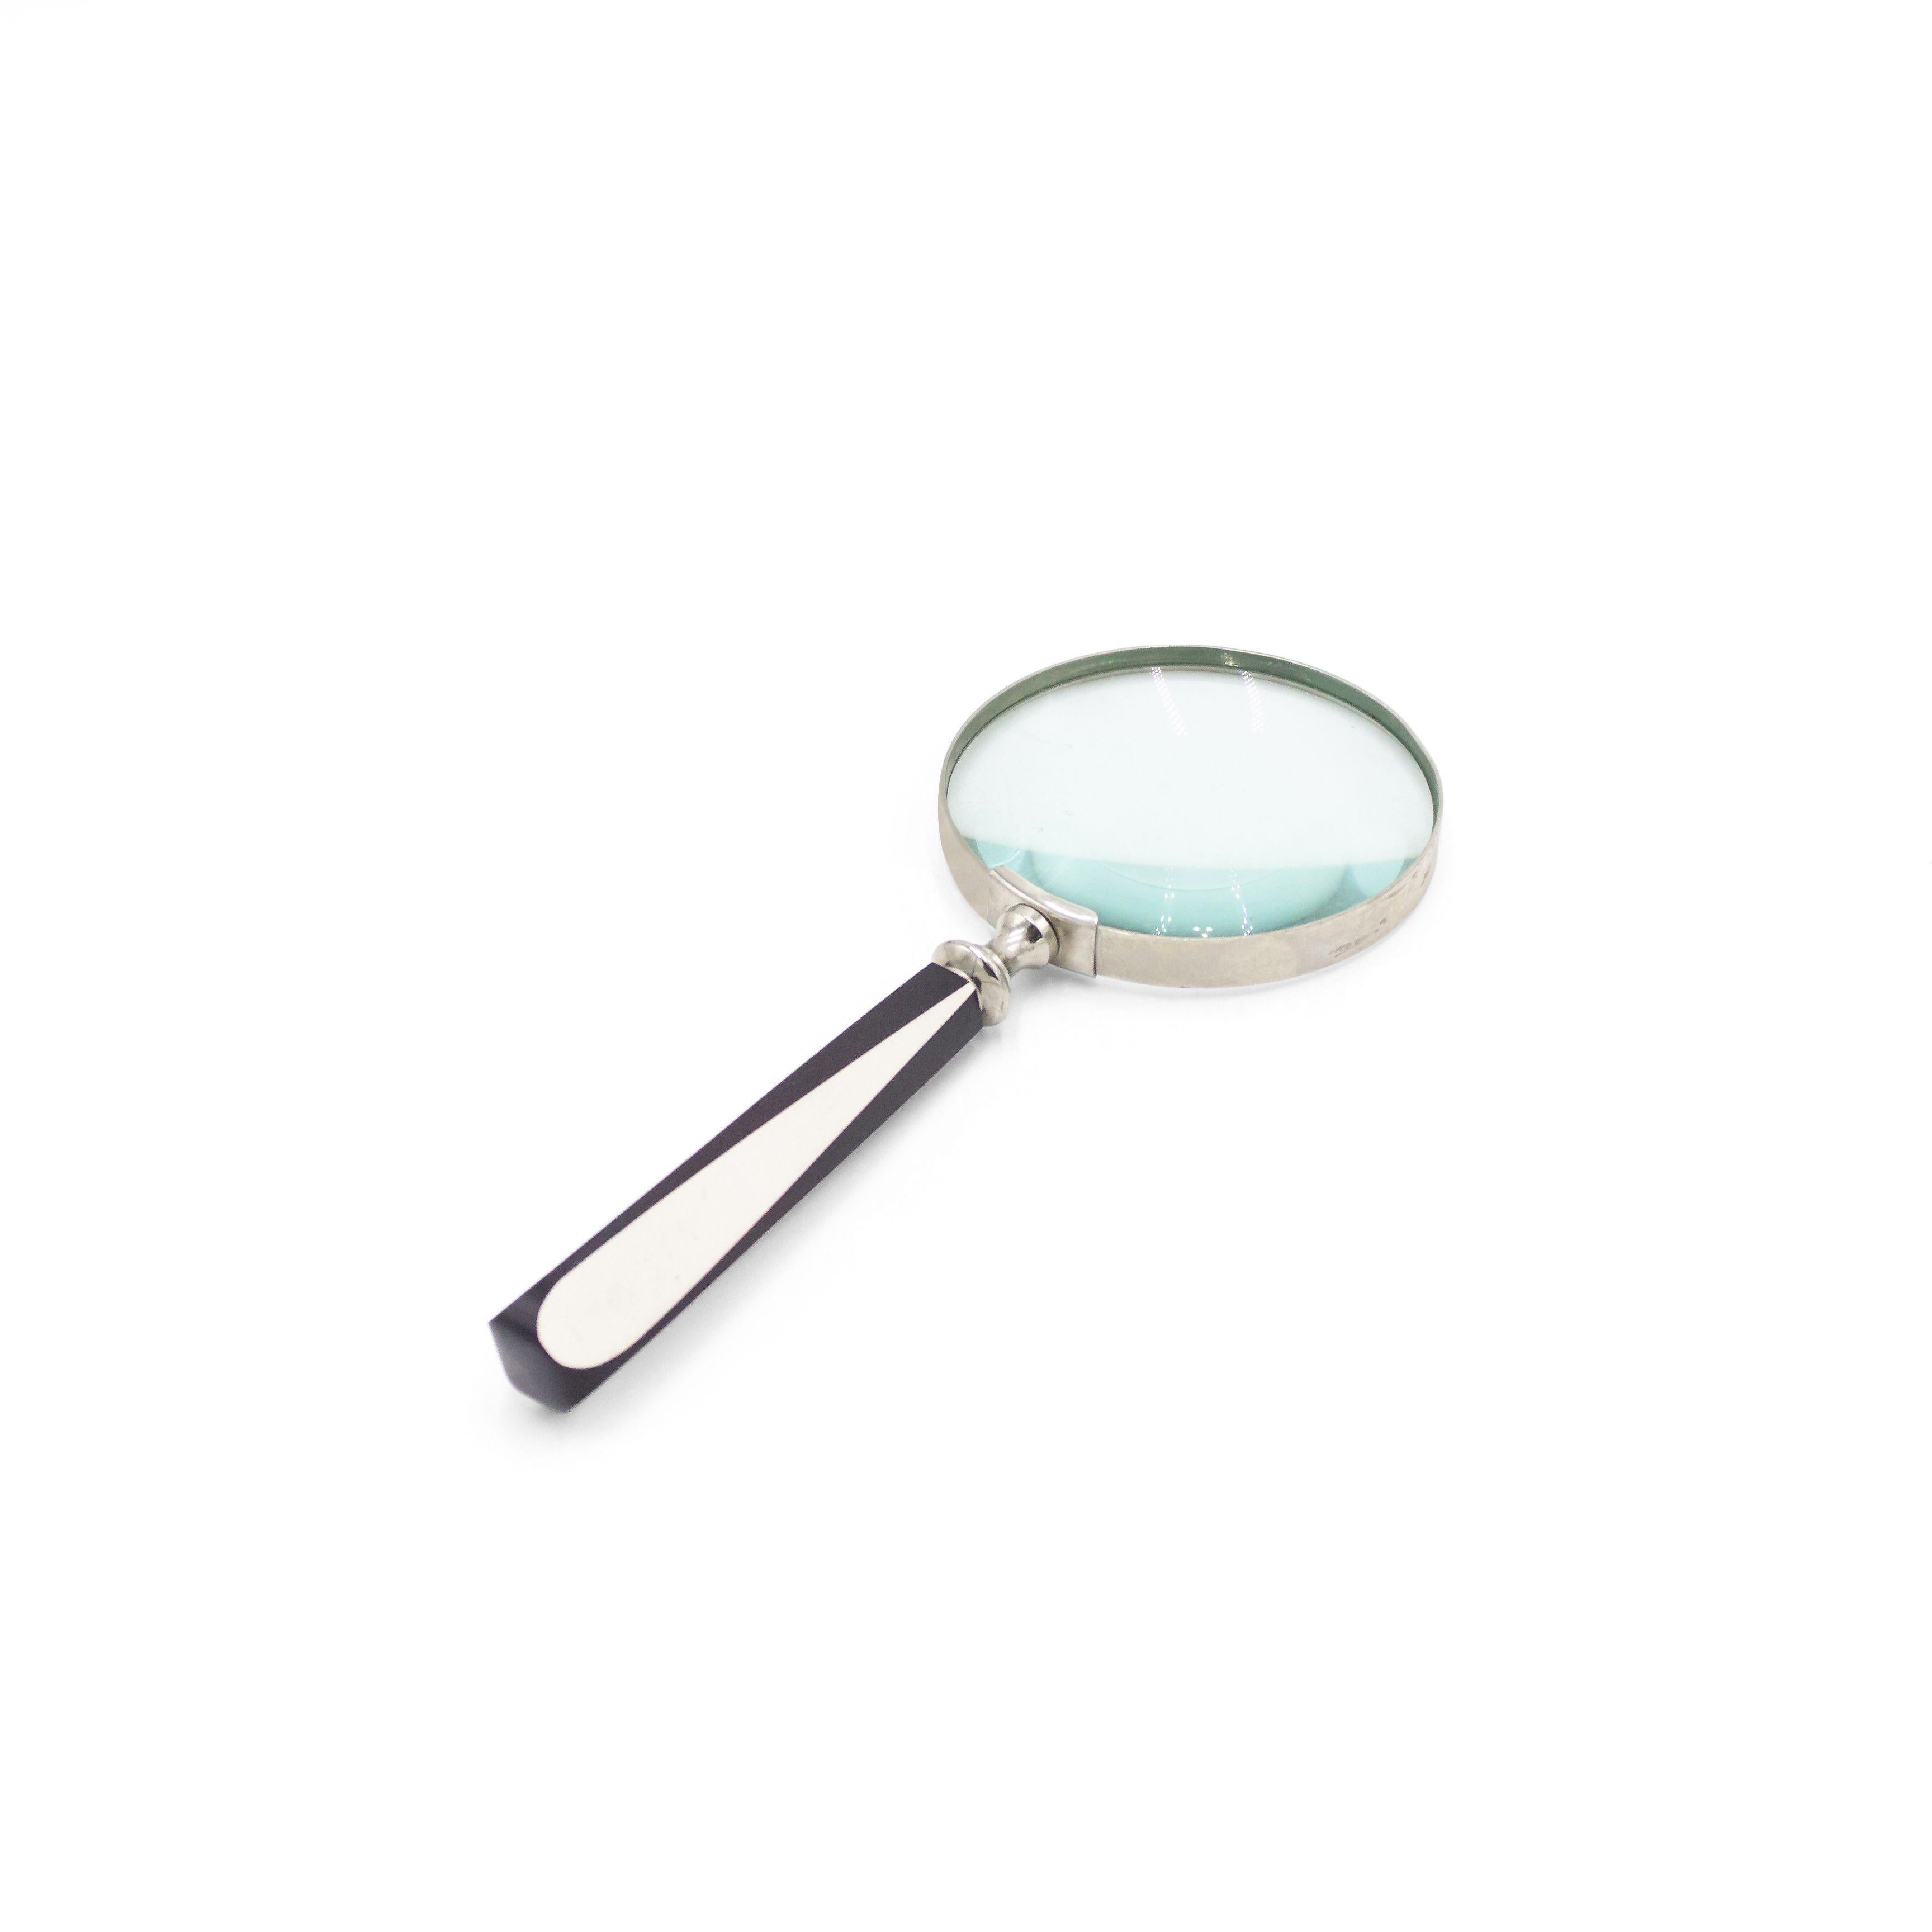 American Mid-Century Black and White Magnifying Glass